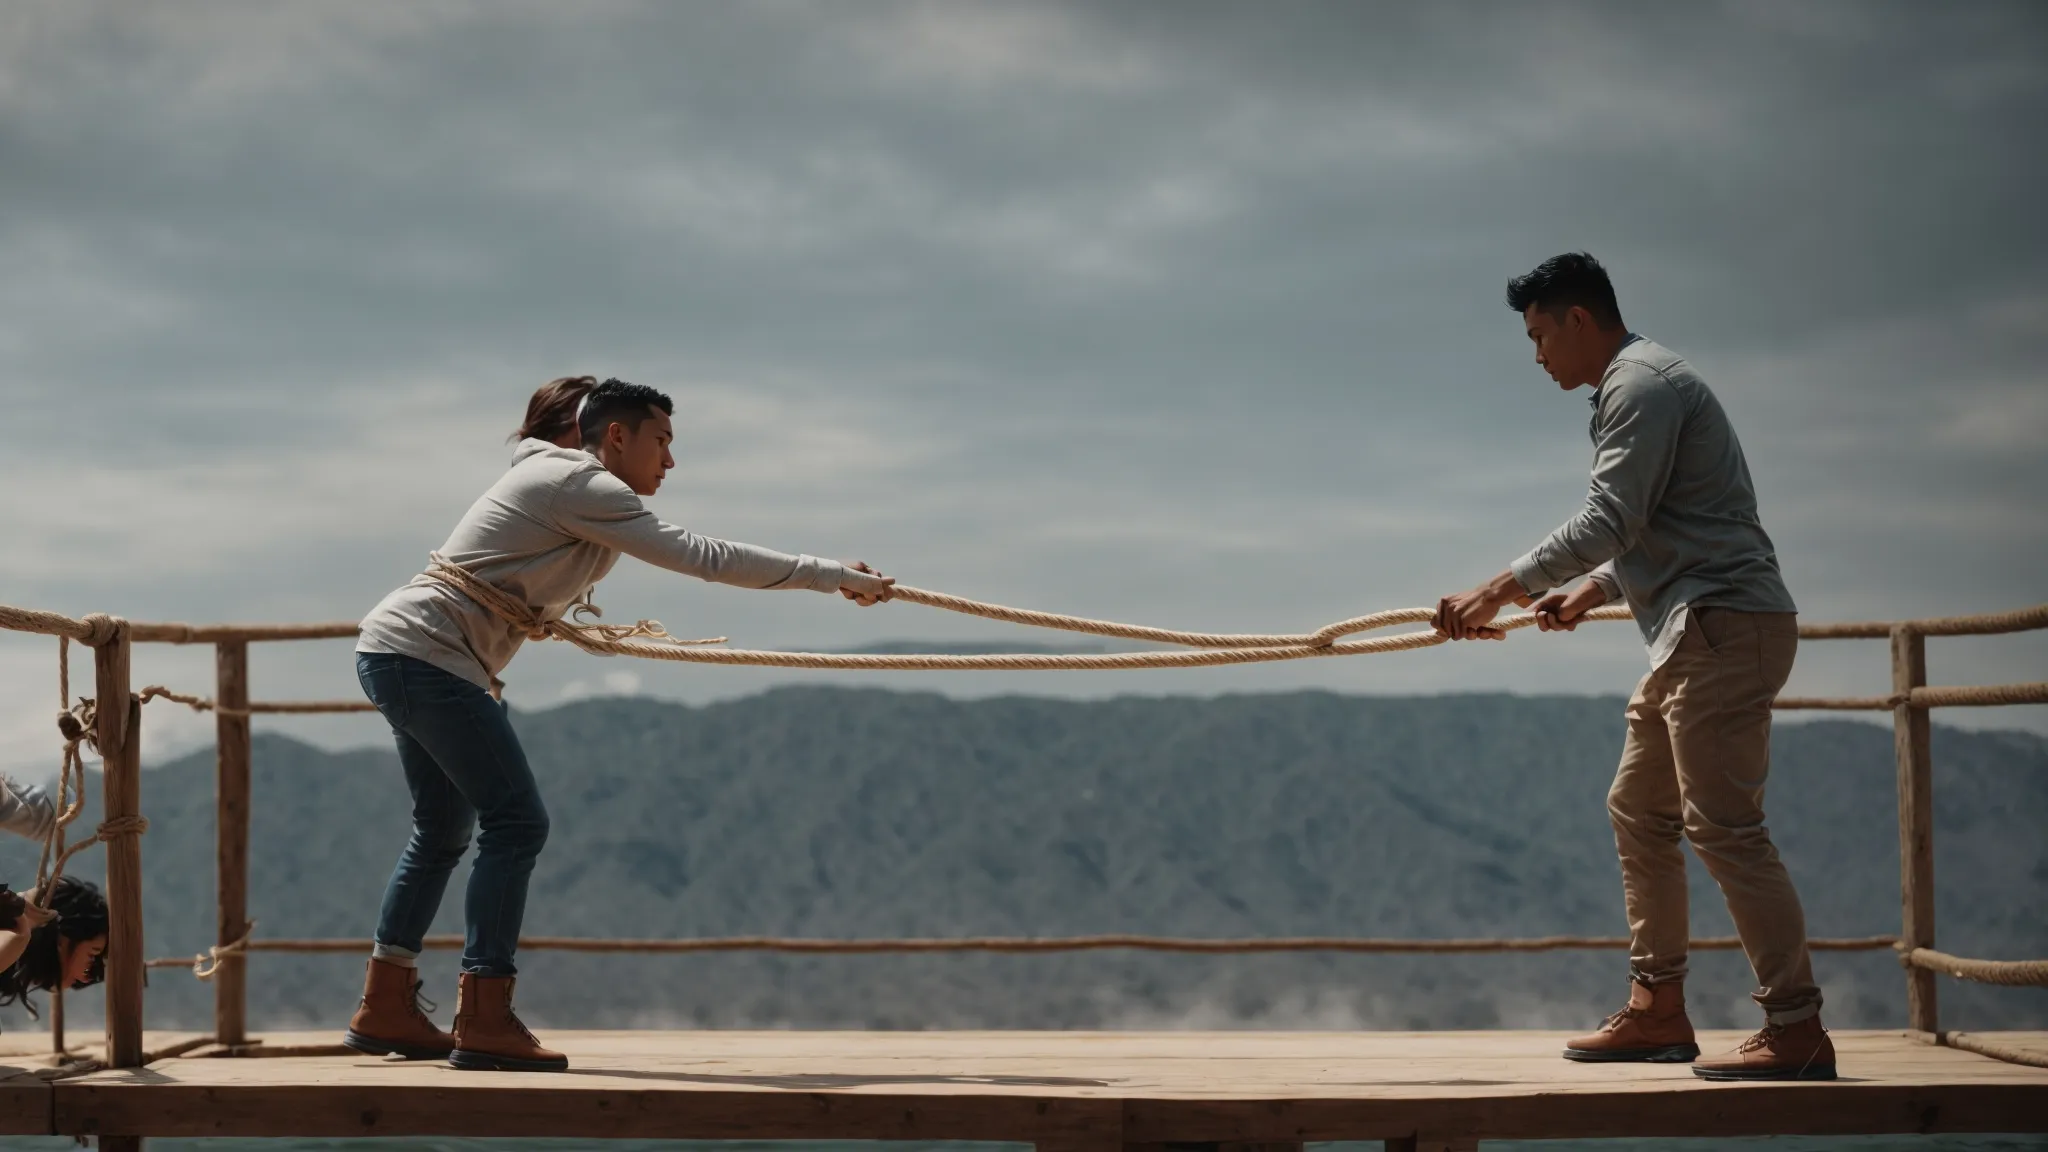 two individuals engage in a tug-of-war using a rope, each standing on a platform labeled "content marketing" and "digital marketing" respectively.